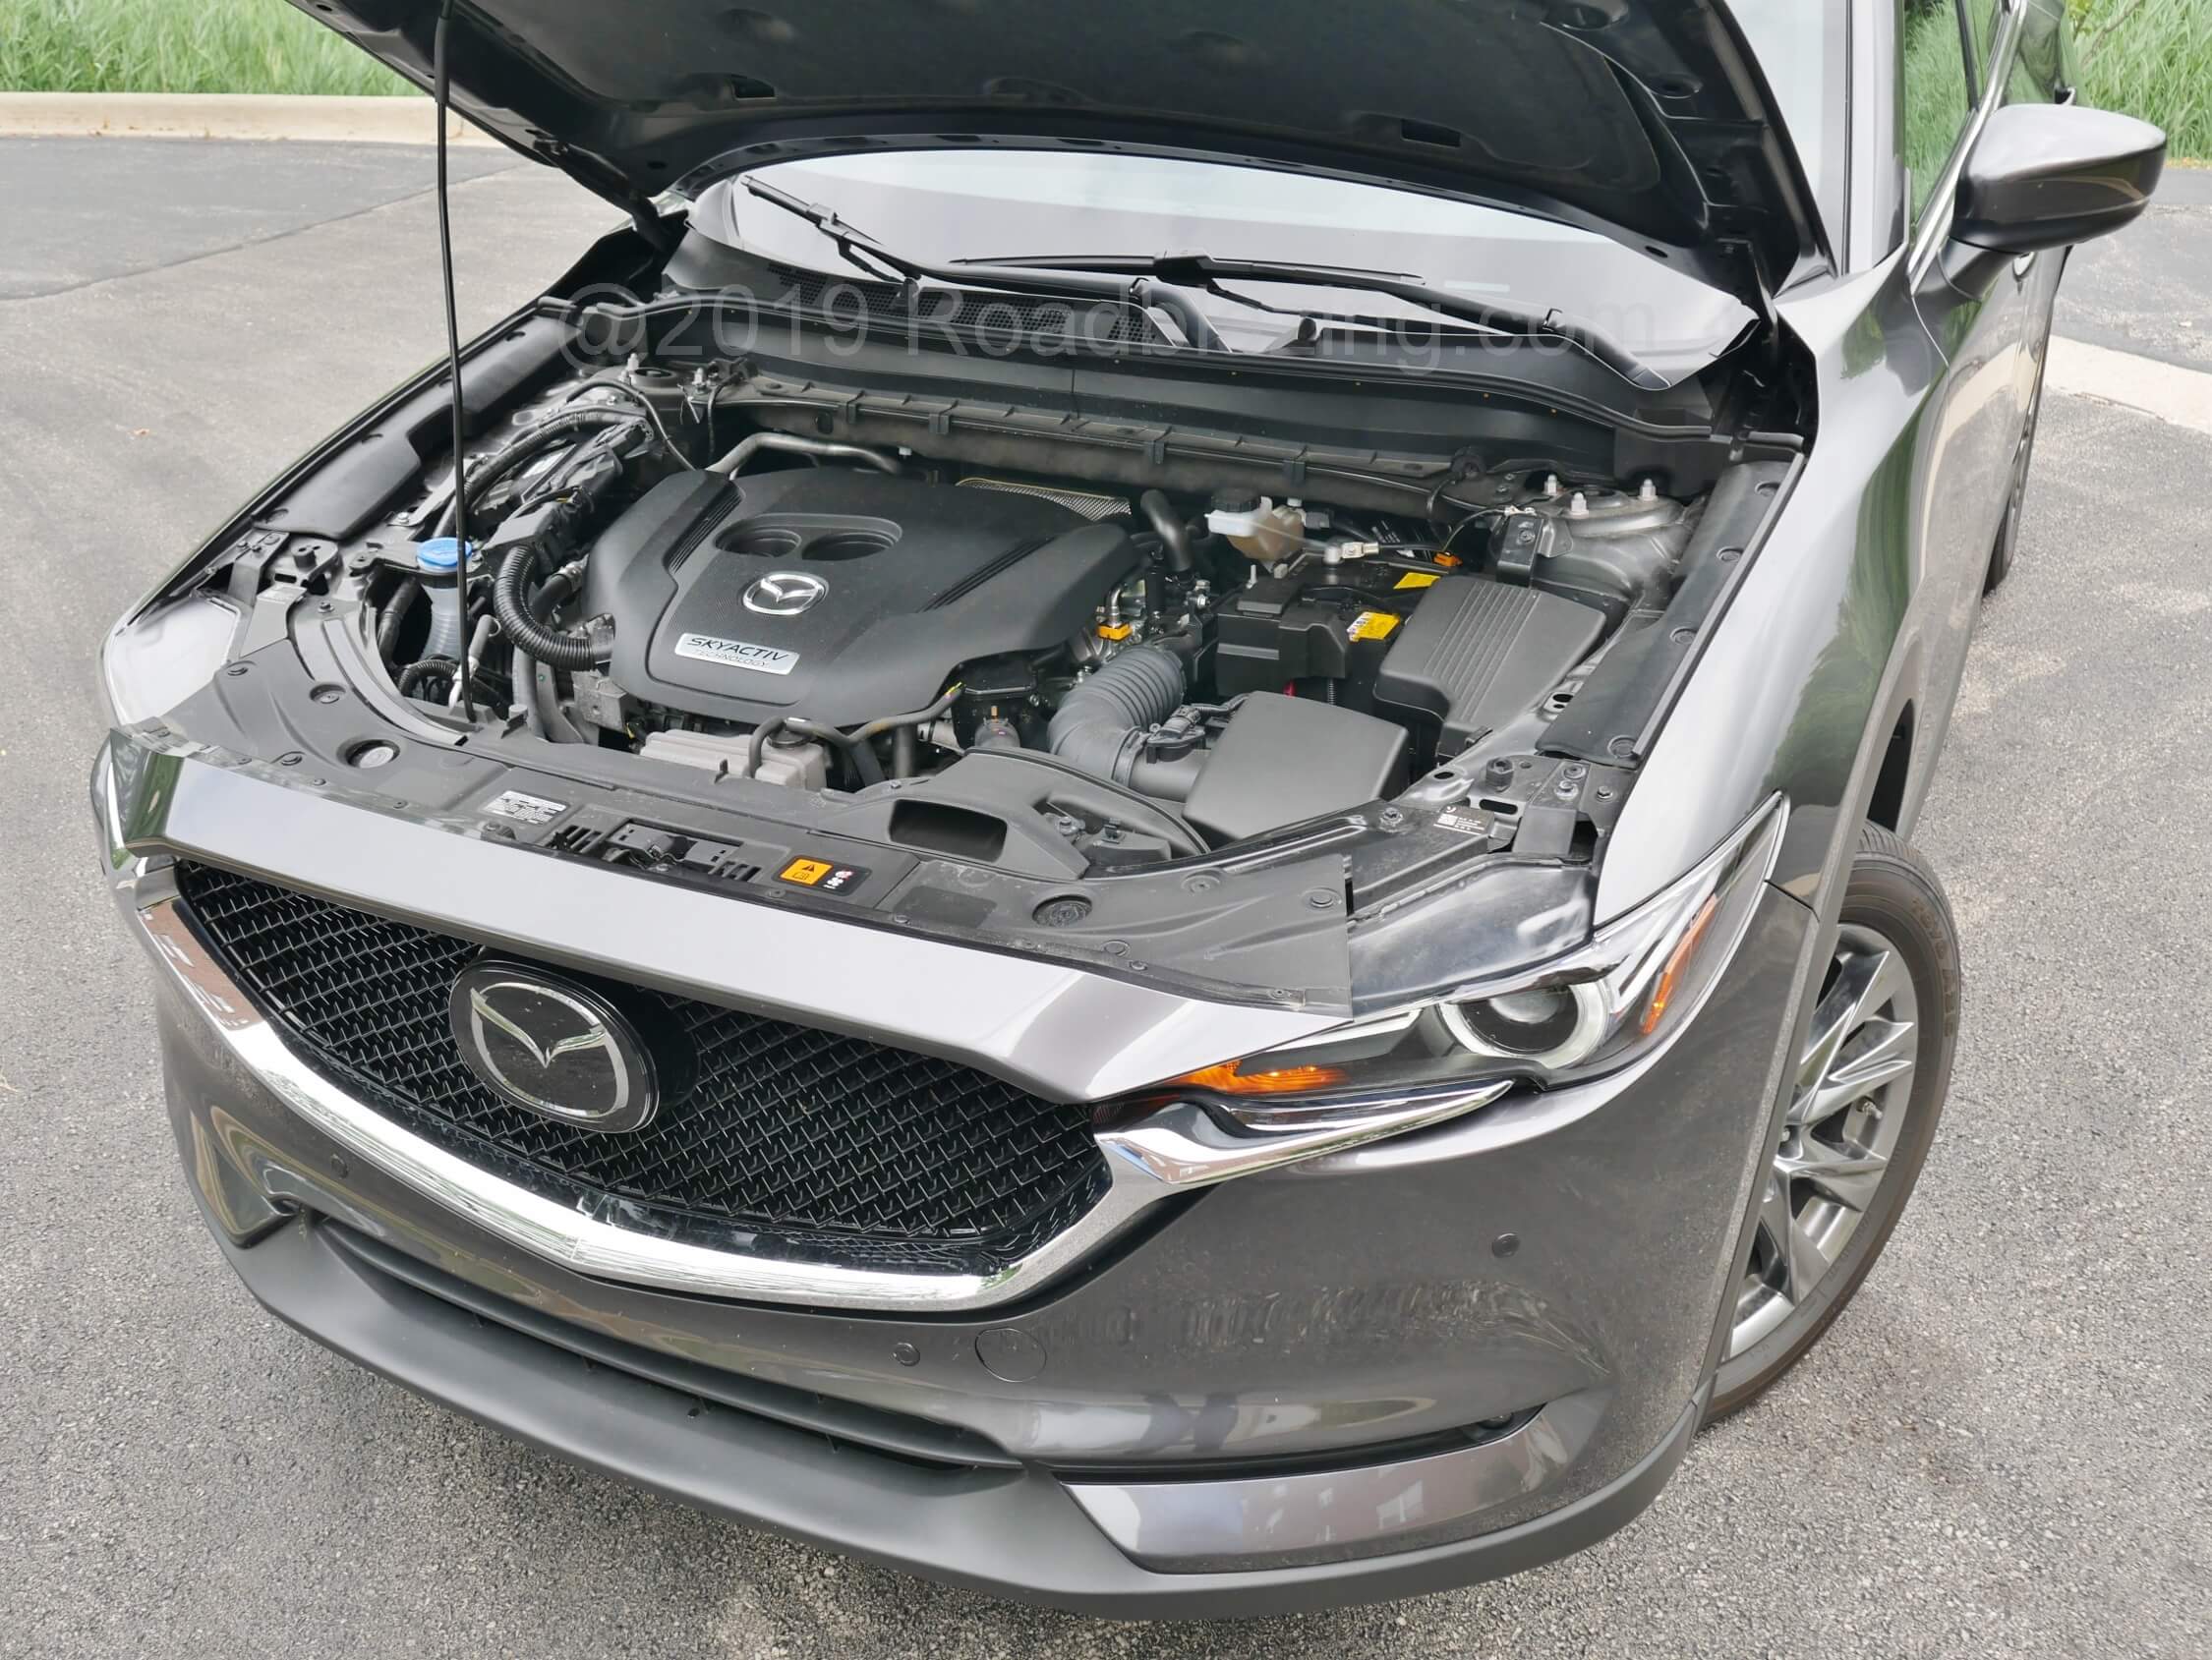 2019 Mazda CX-5 Signature AWD: Not wanting to be revved as high as the Touring's naturally aspirated engine, the turbocharged DOHC gas I-4's 310 lb-ft of motorway charging twist is impressive if subtle. With standard up to 50:50 AWD split, this is the quickest Mazda not called Miata. Fuel economy = 25 mpg